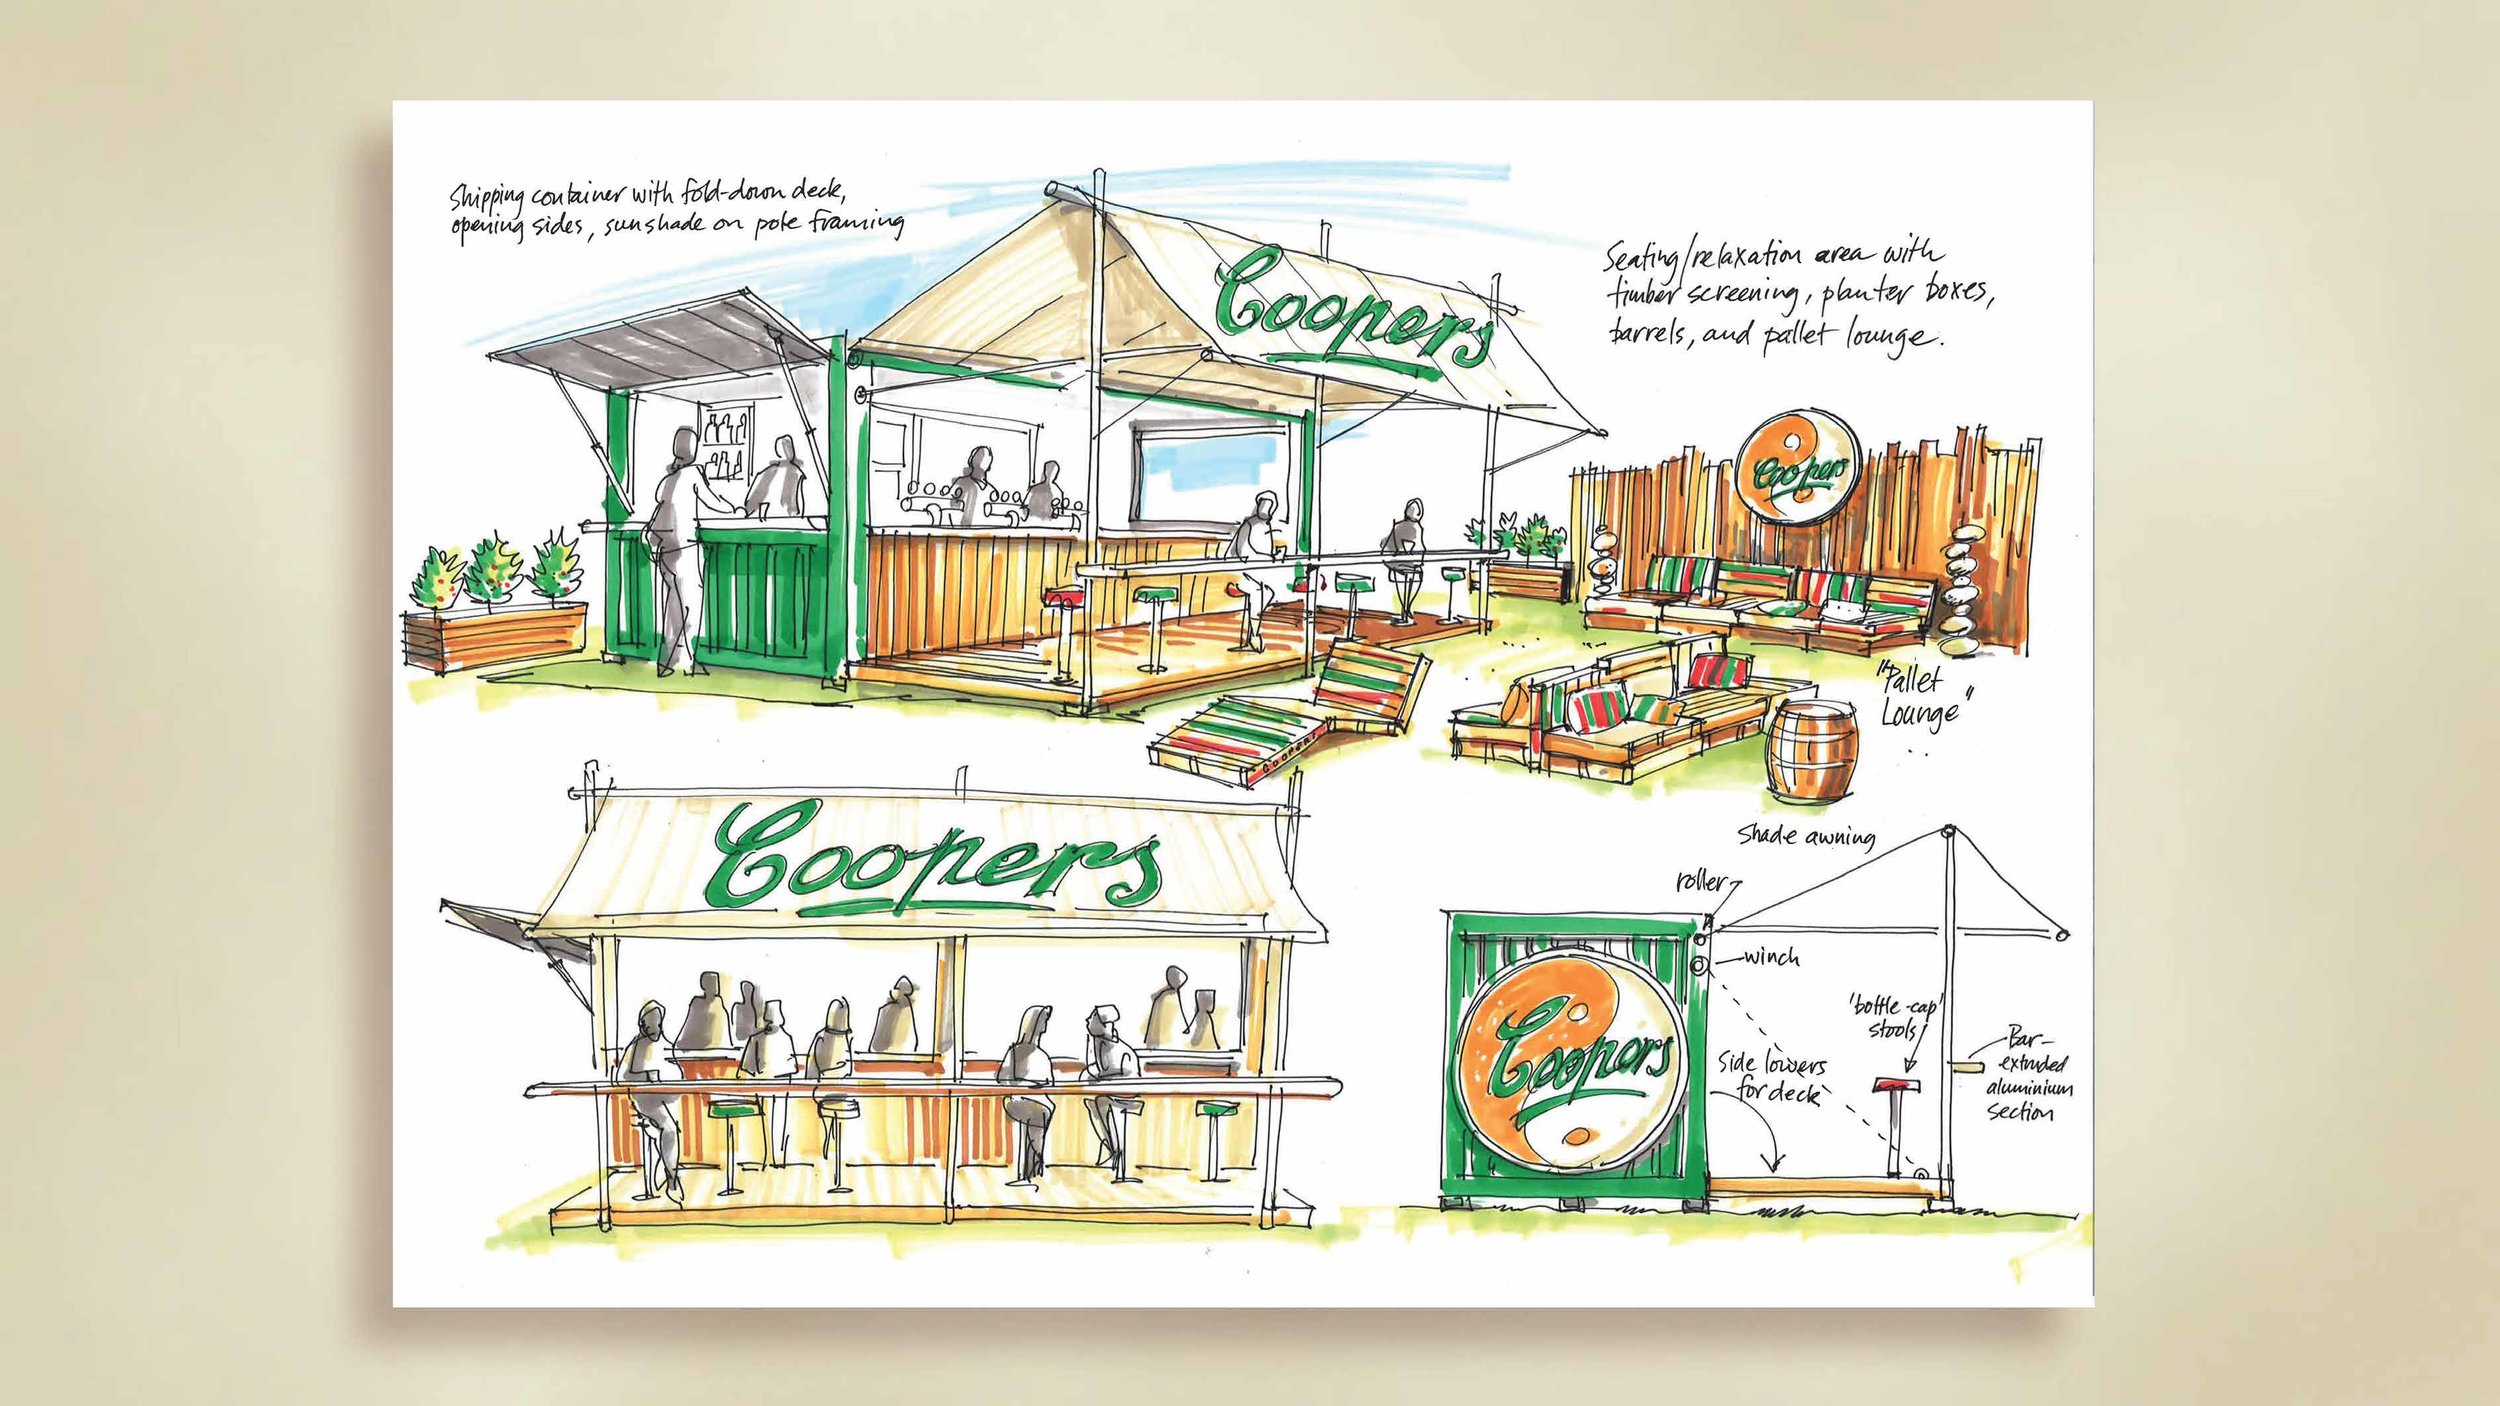 Coopers 'Perfect balance' campaign